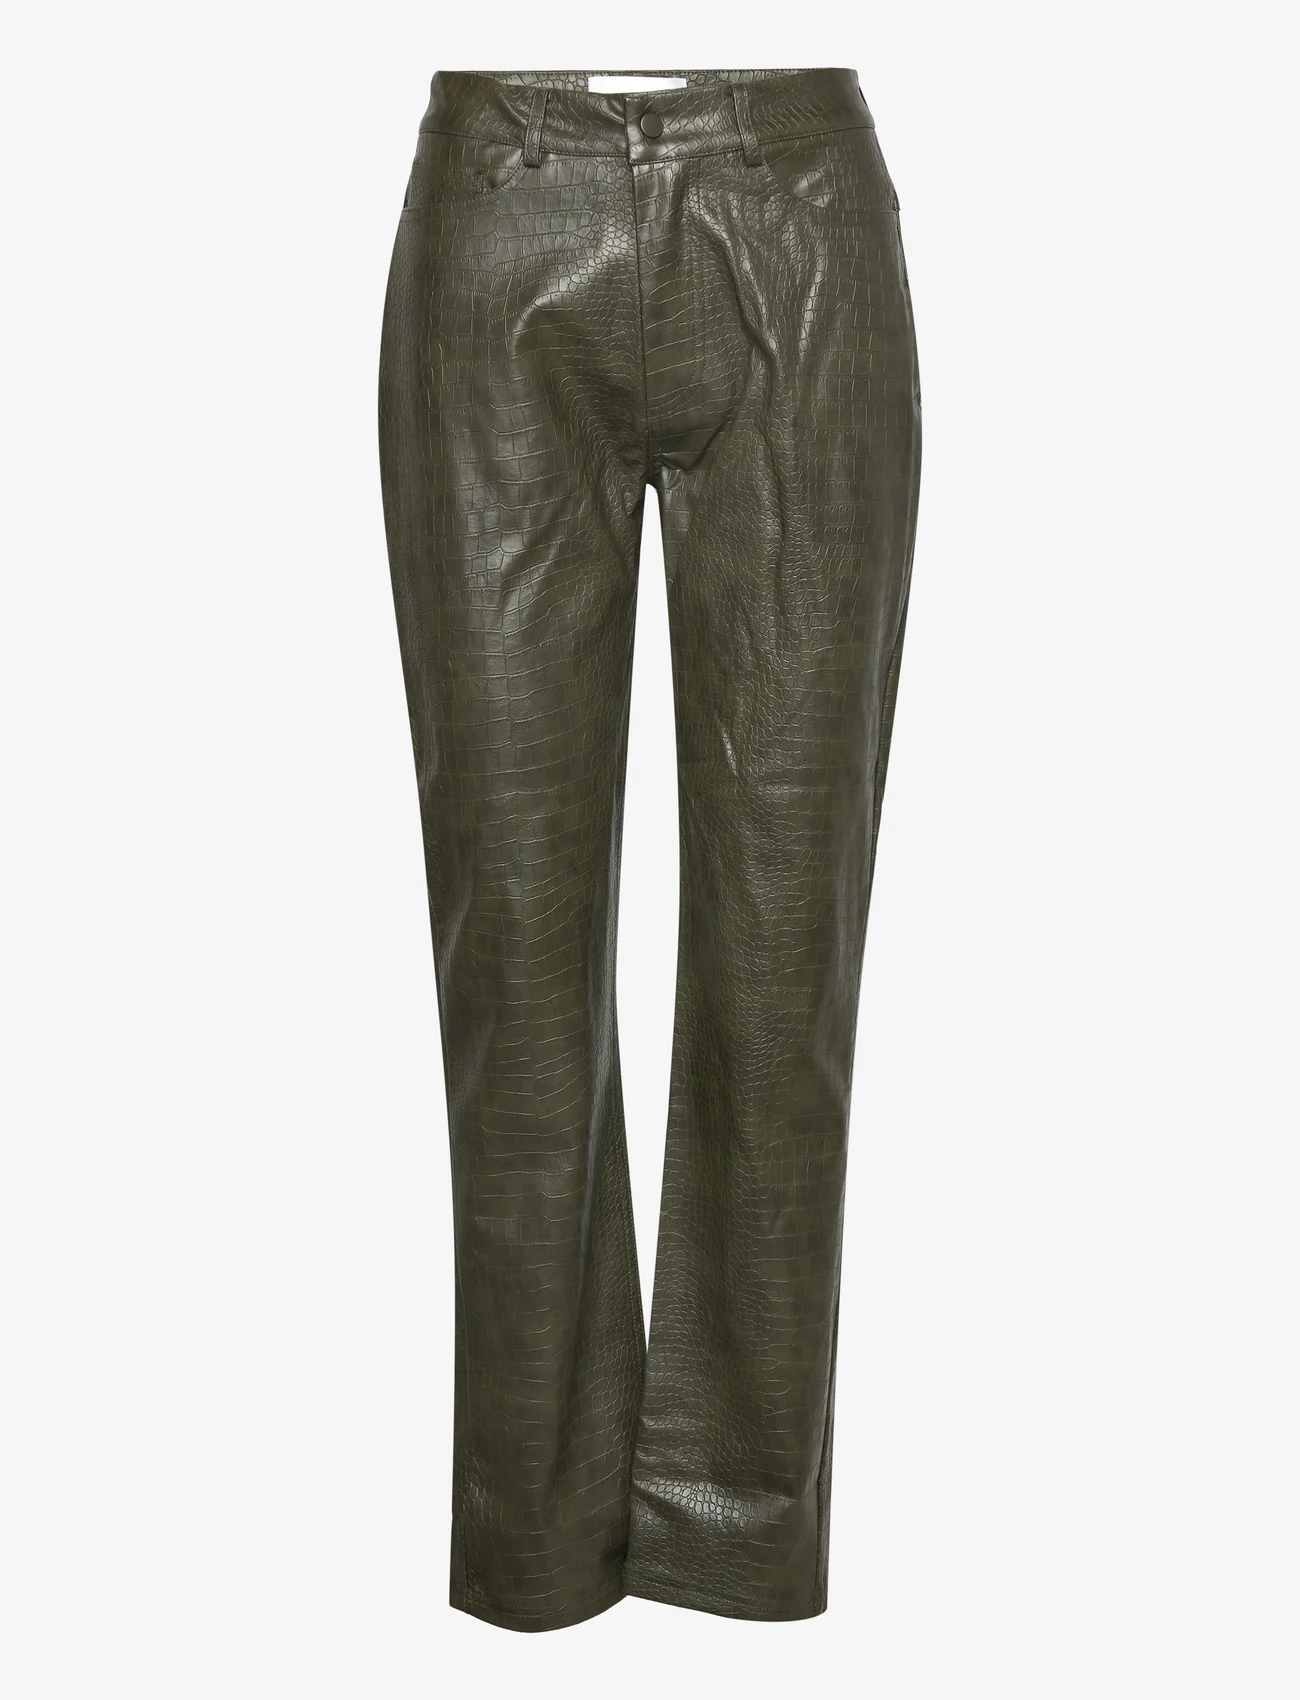 Hosbjerg - Haze Croc Pants - party wear at outlet prices - army - 0